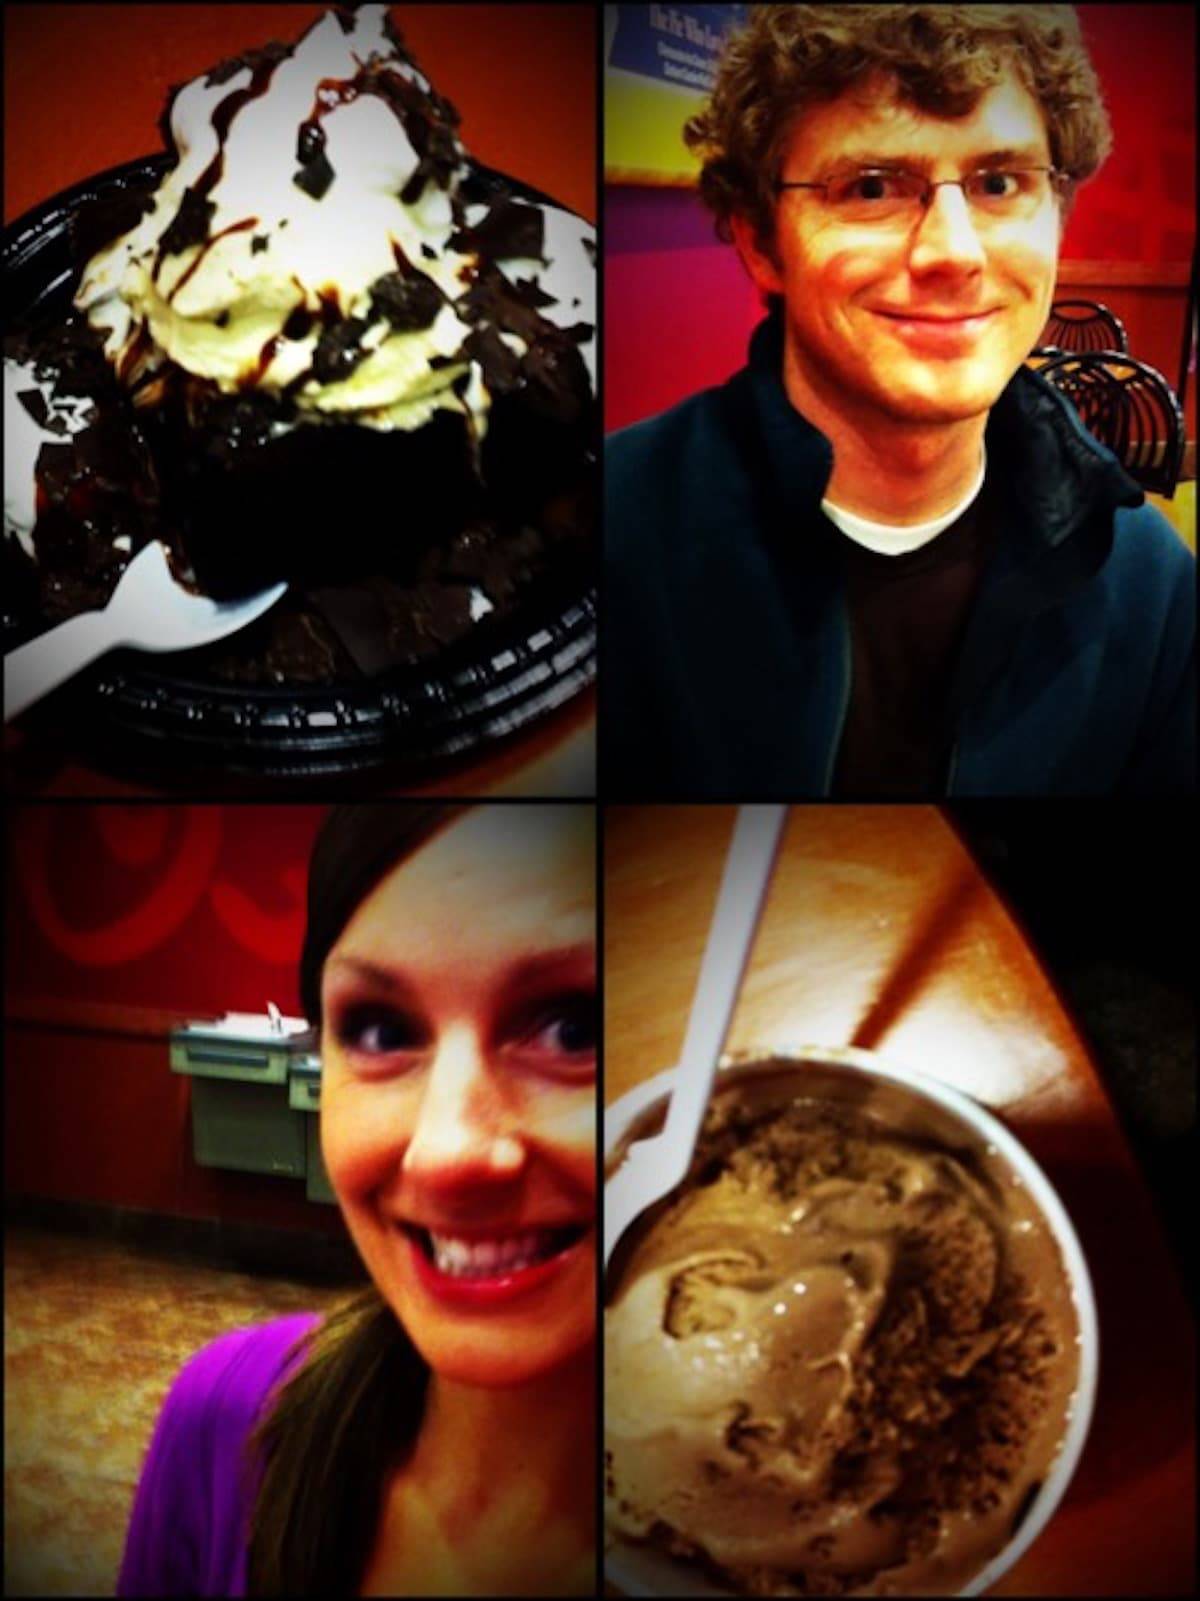 Collage of four images containing ice cream bowls and a man and woman.